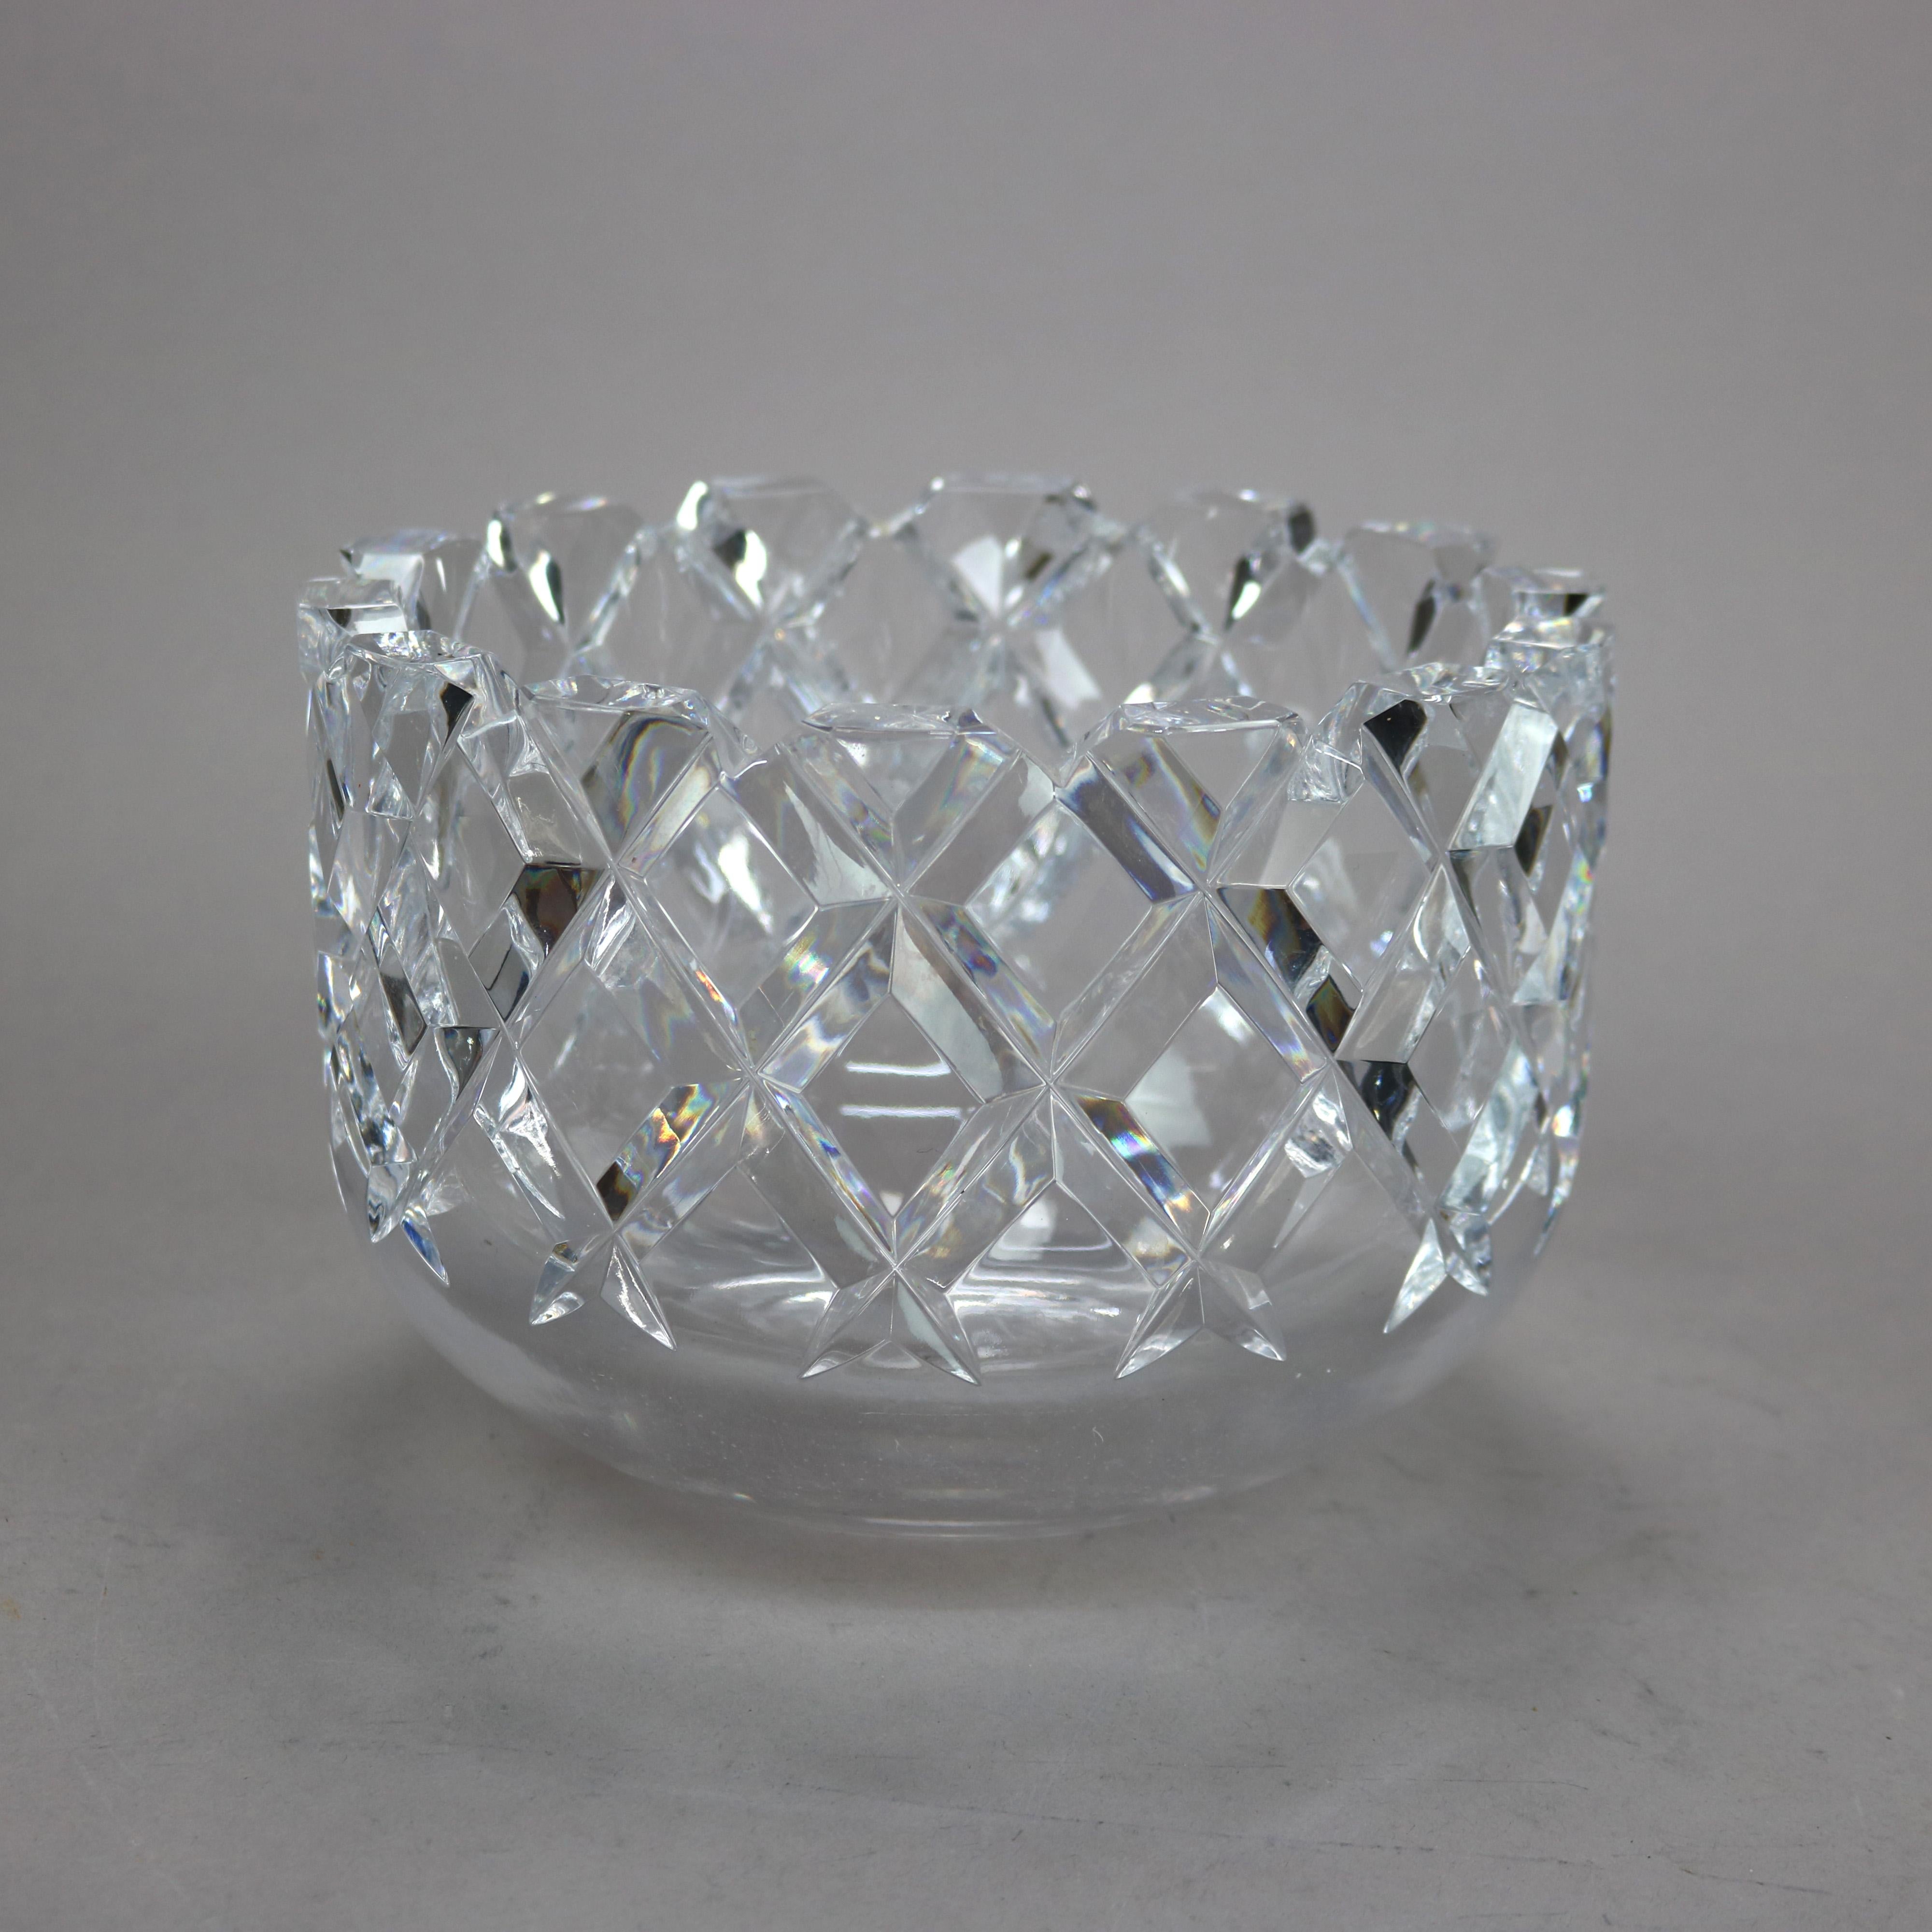 A crystal fruit bowl by Orrefors in the Sofiero pattern offers checkered diamond pattern with original label and signature as photographed, 20th century.

Measures - 5.5'' H X 8'' W X 8'' D.

Catalogue Note: Ask about DISCOUNTED DELIVERY RATES